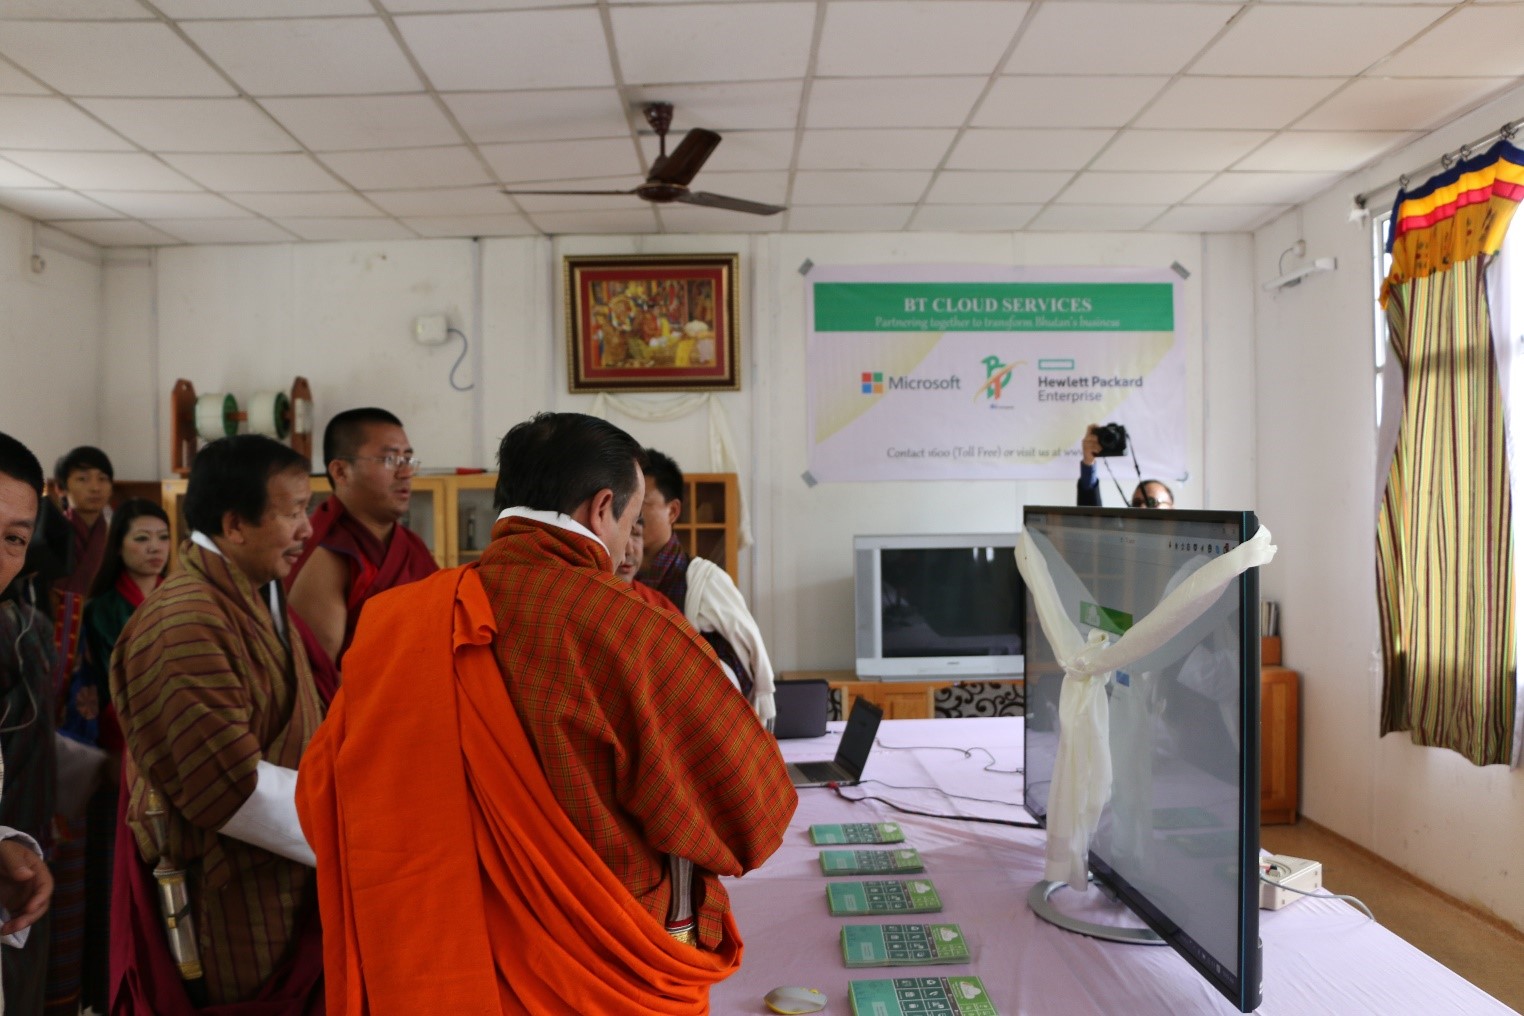 Showcase of hosted services at the launch ceremony of Bhutan Telecom’s partnership with Microsoft and HP 